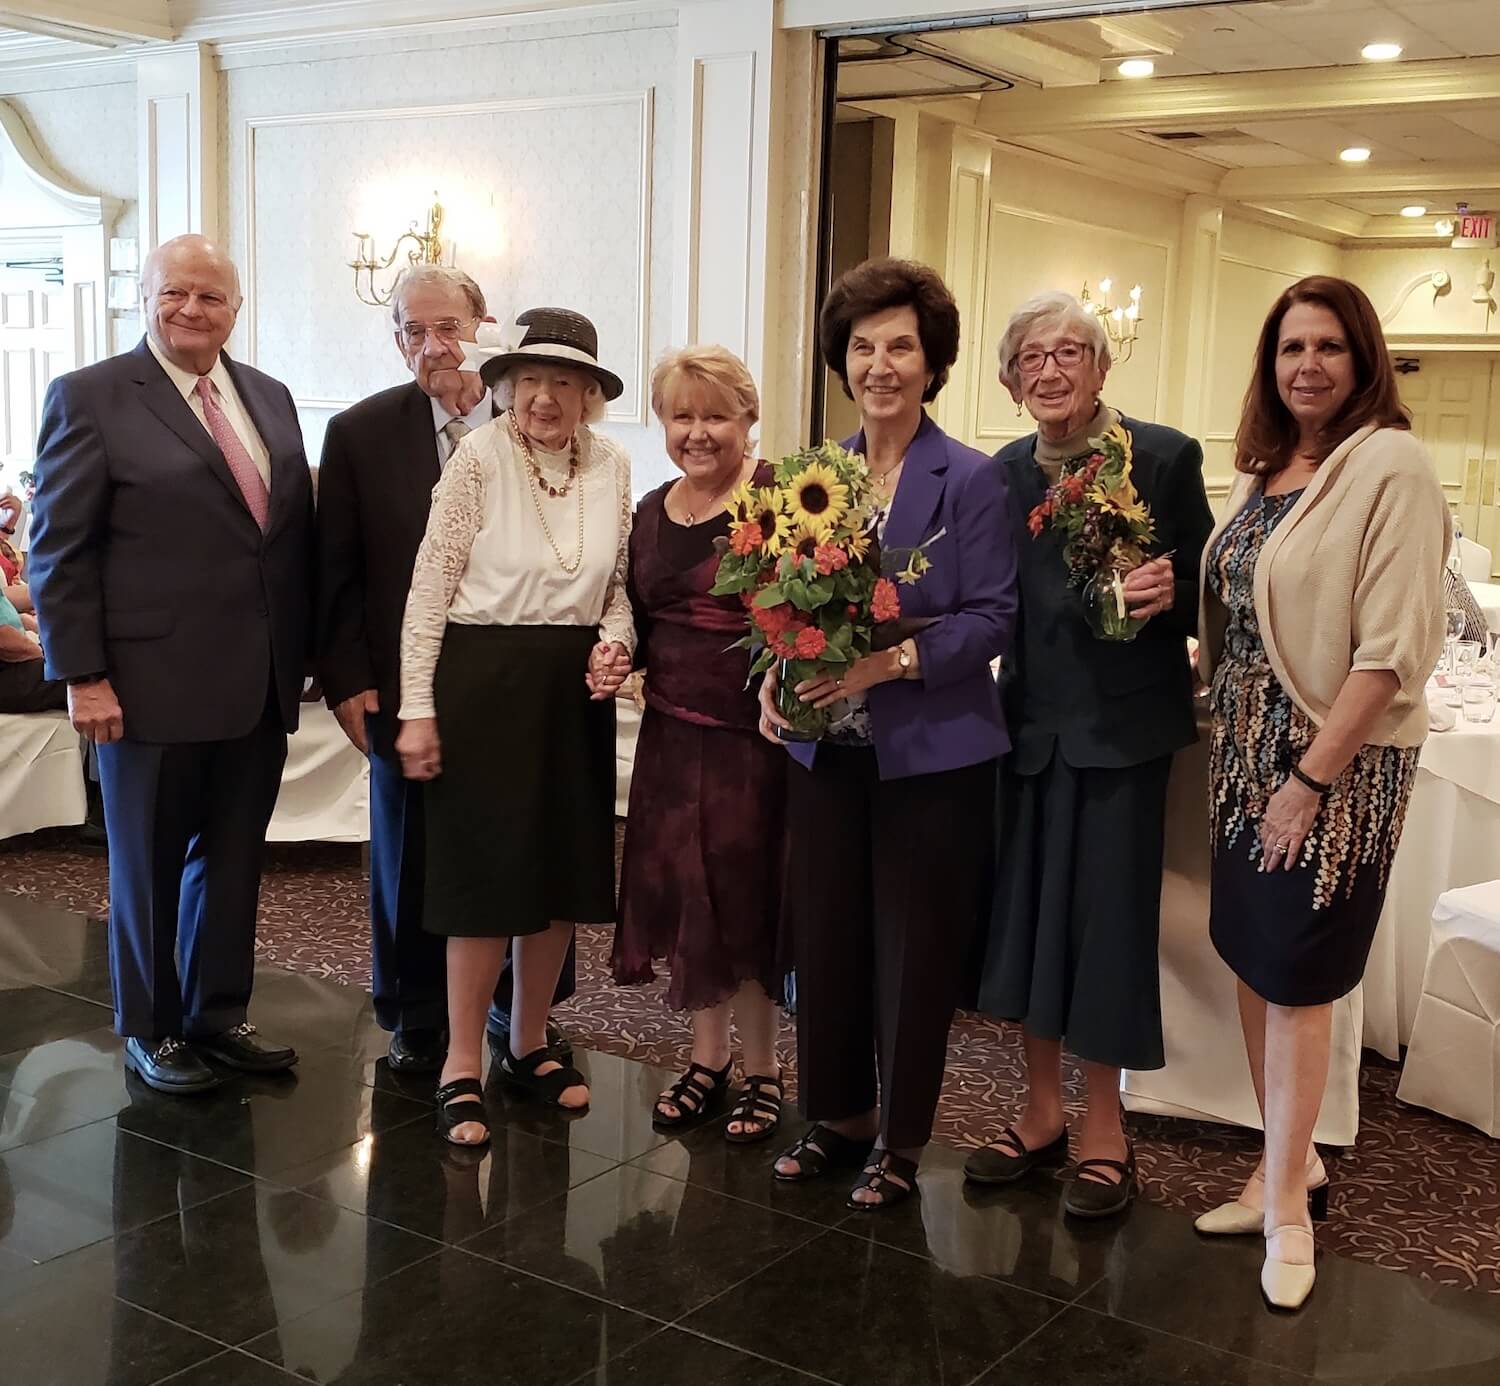 Gary S. Horan, FACHE, President and CEO; Volunteers Al Schuhmann and Elie Blore; Nadine Brechner, Vice President of the Trinitas Health Foundation and Chief Development Officer; Volunteers Marie Laface and Roz Schwartzberg; and Lisa Erlich Liss, Director of Volunteer Services.